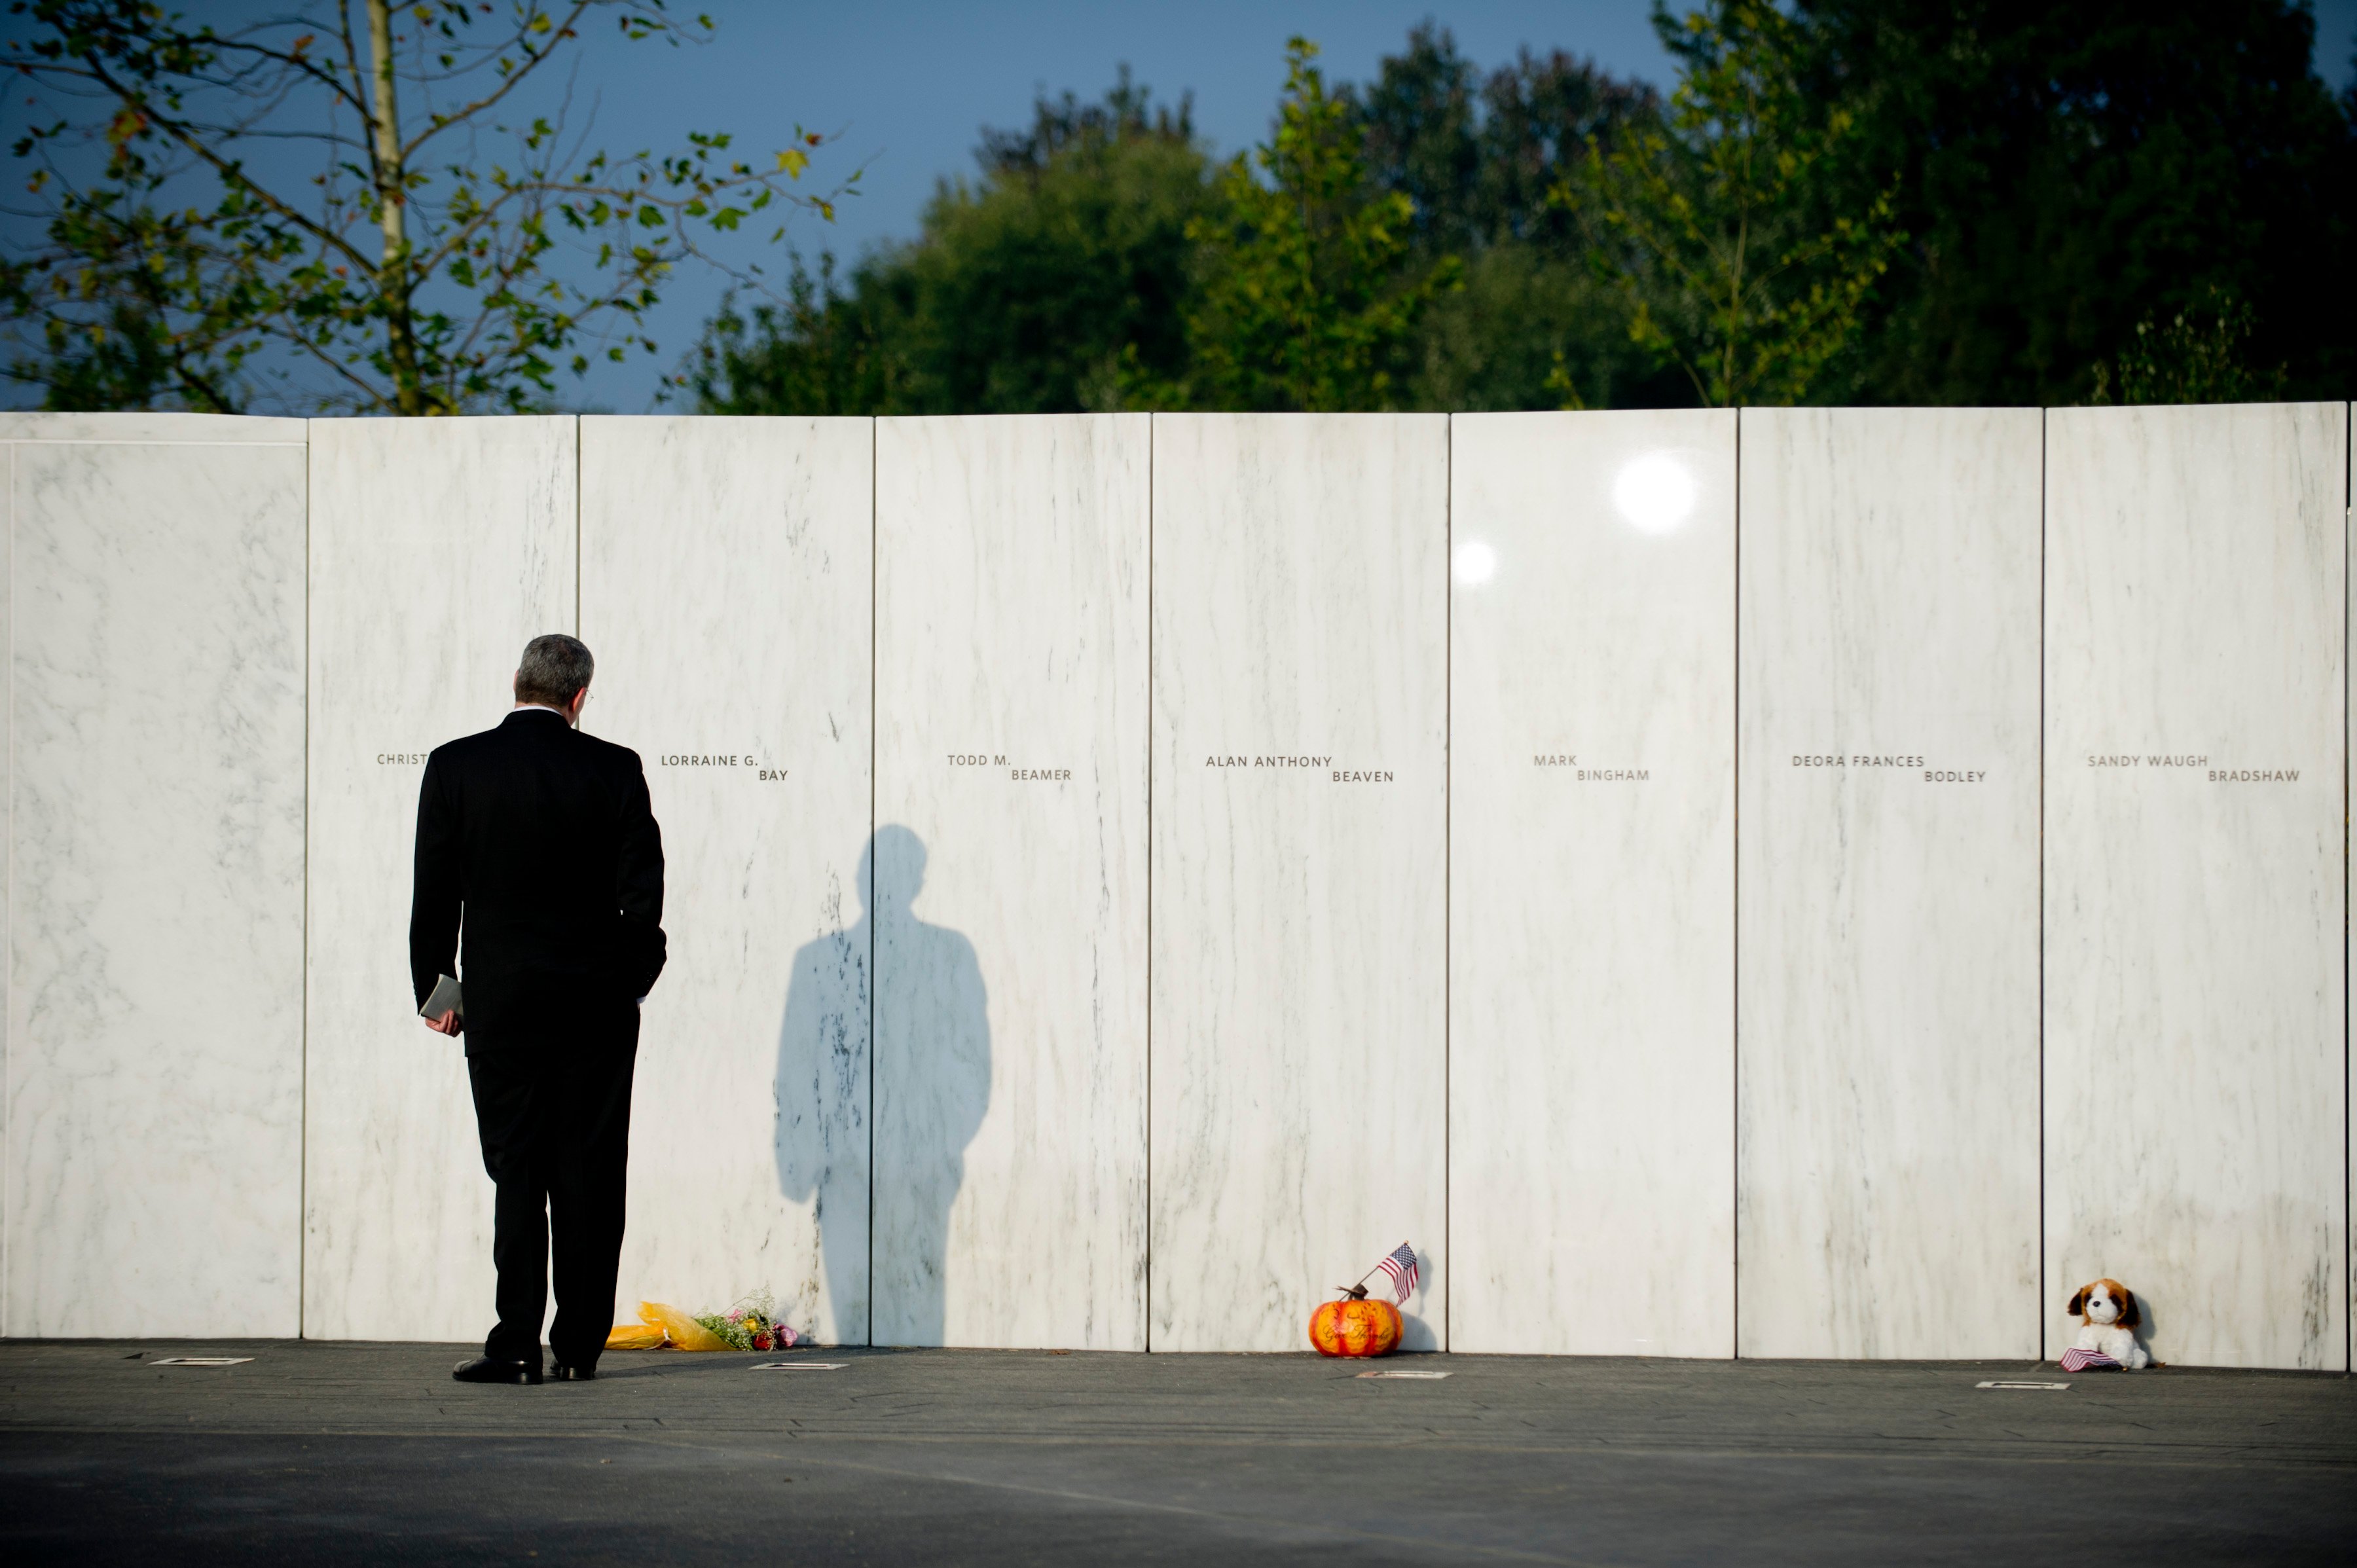 Someone at the Flight 93 National Memorial